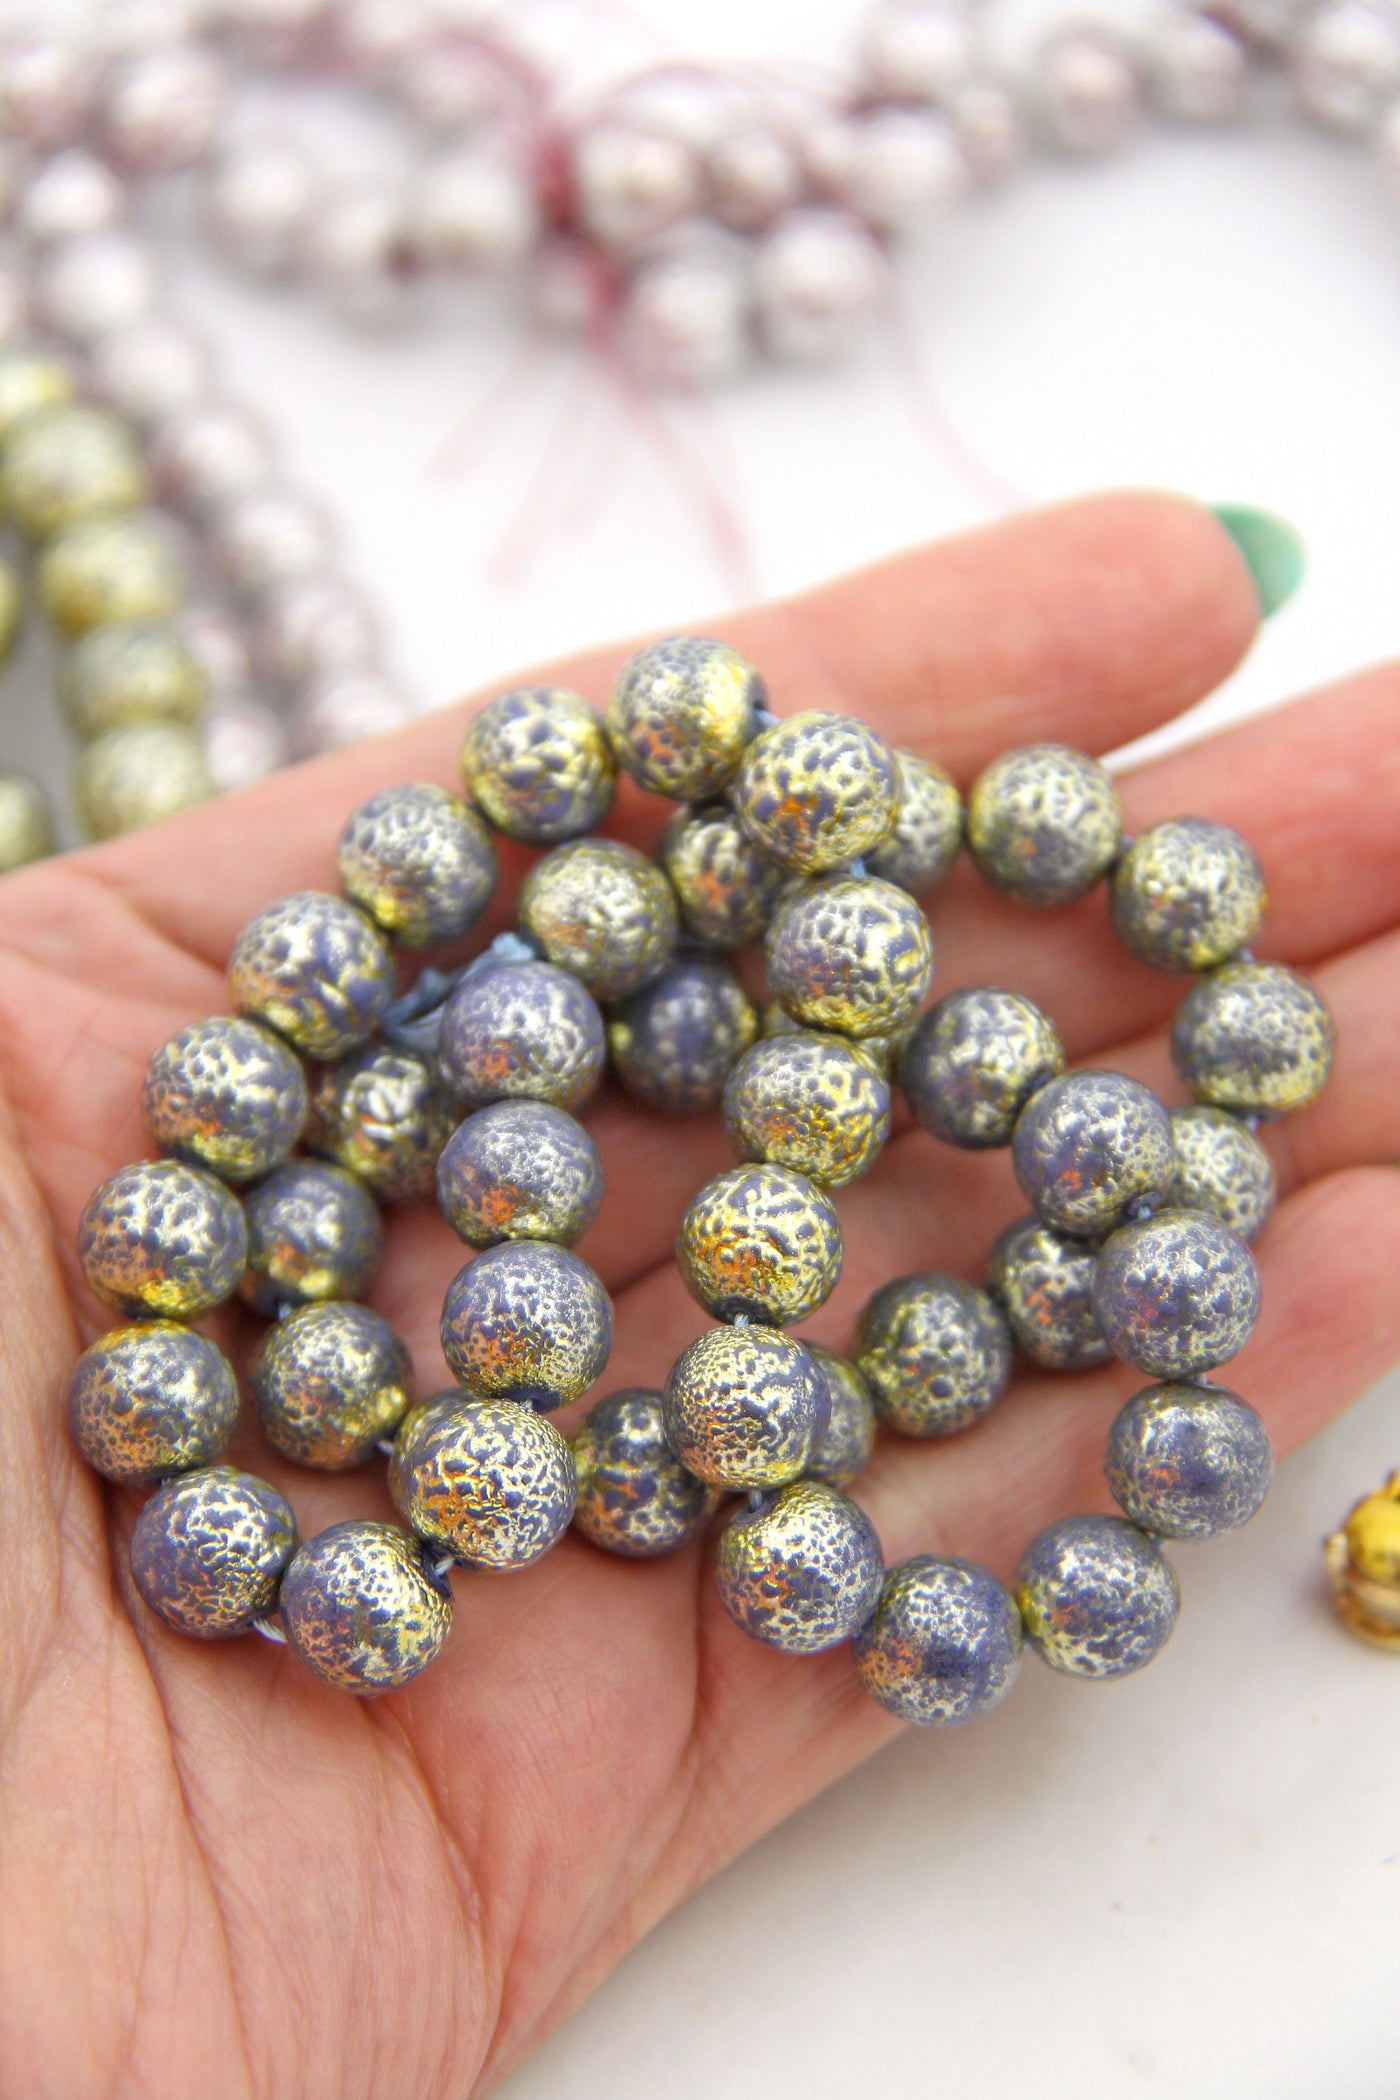 Metallic Beads inspired by the new James Webb Space Telescope images